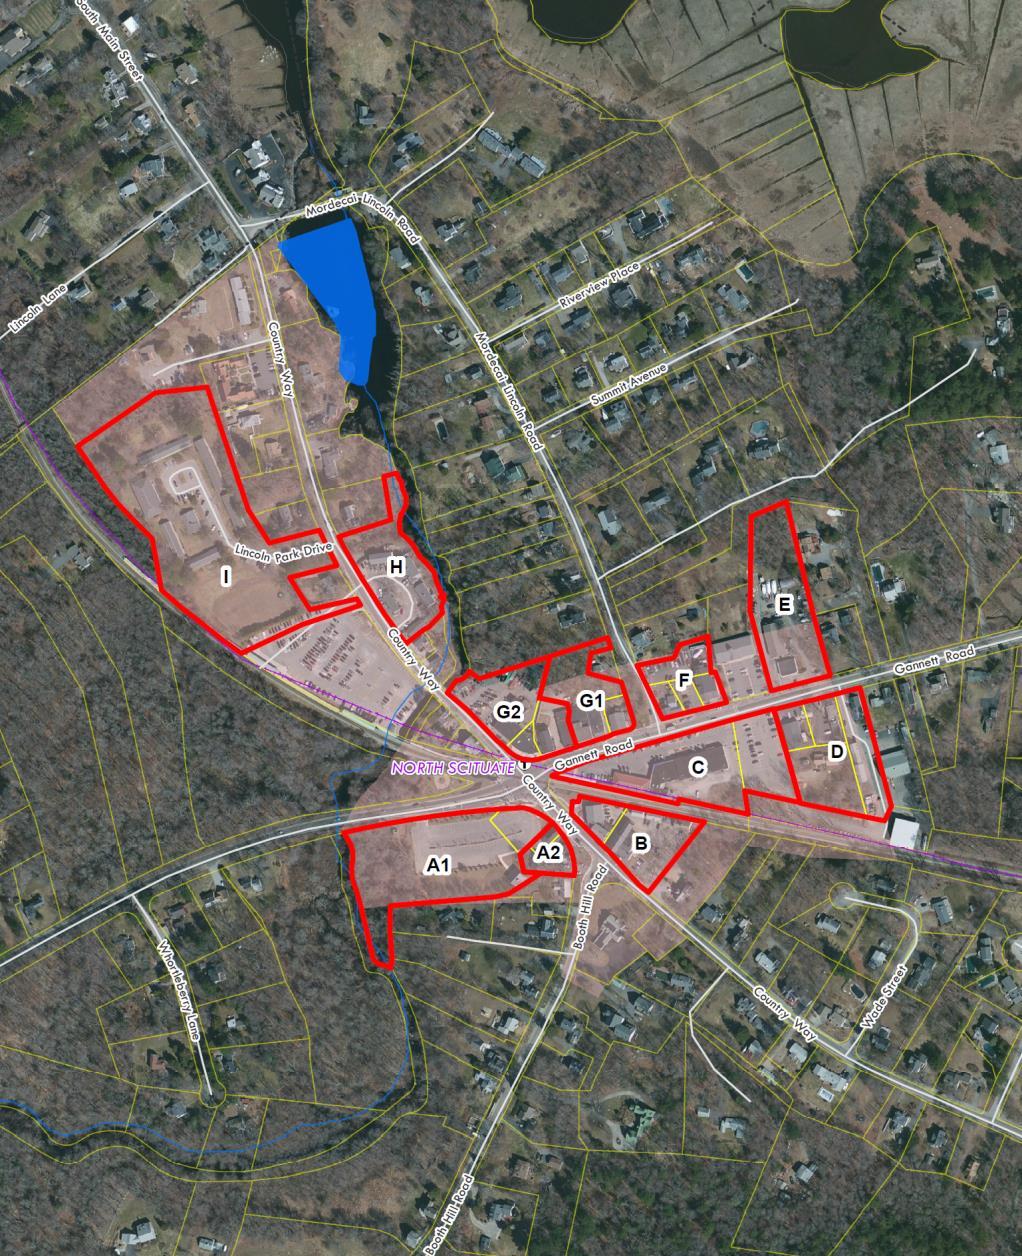 North Scituate Opportunities Strong redevelopment Potential Preliminary Opportunity Sites Identified: 9 Strongest potential in village center existing cluster Redevelopment requires sewer